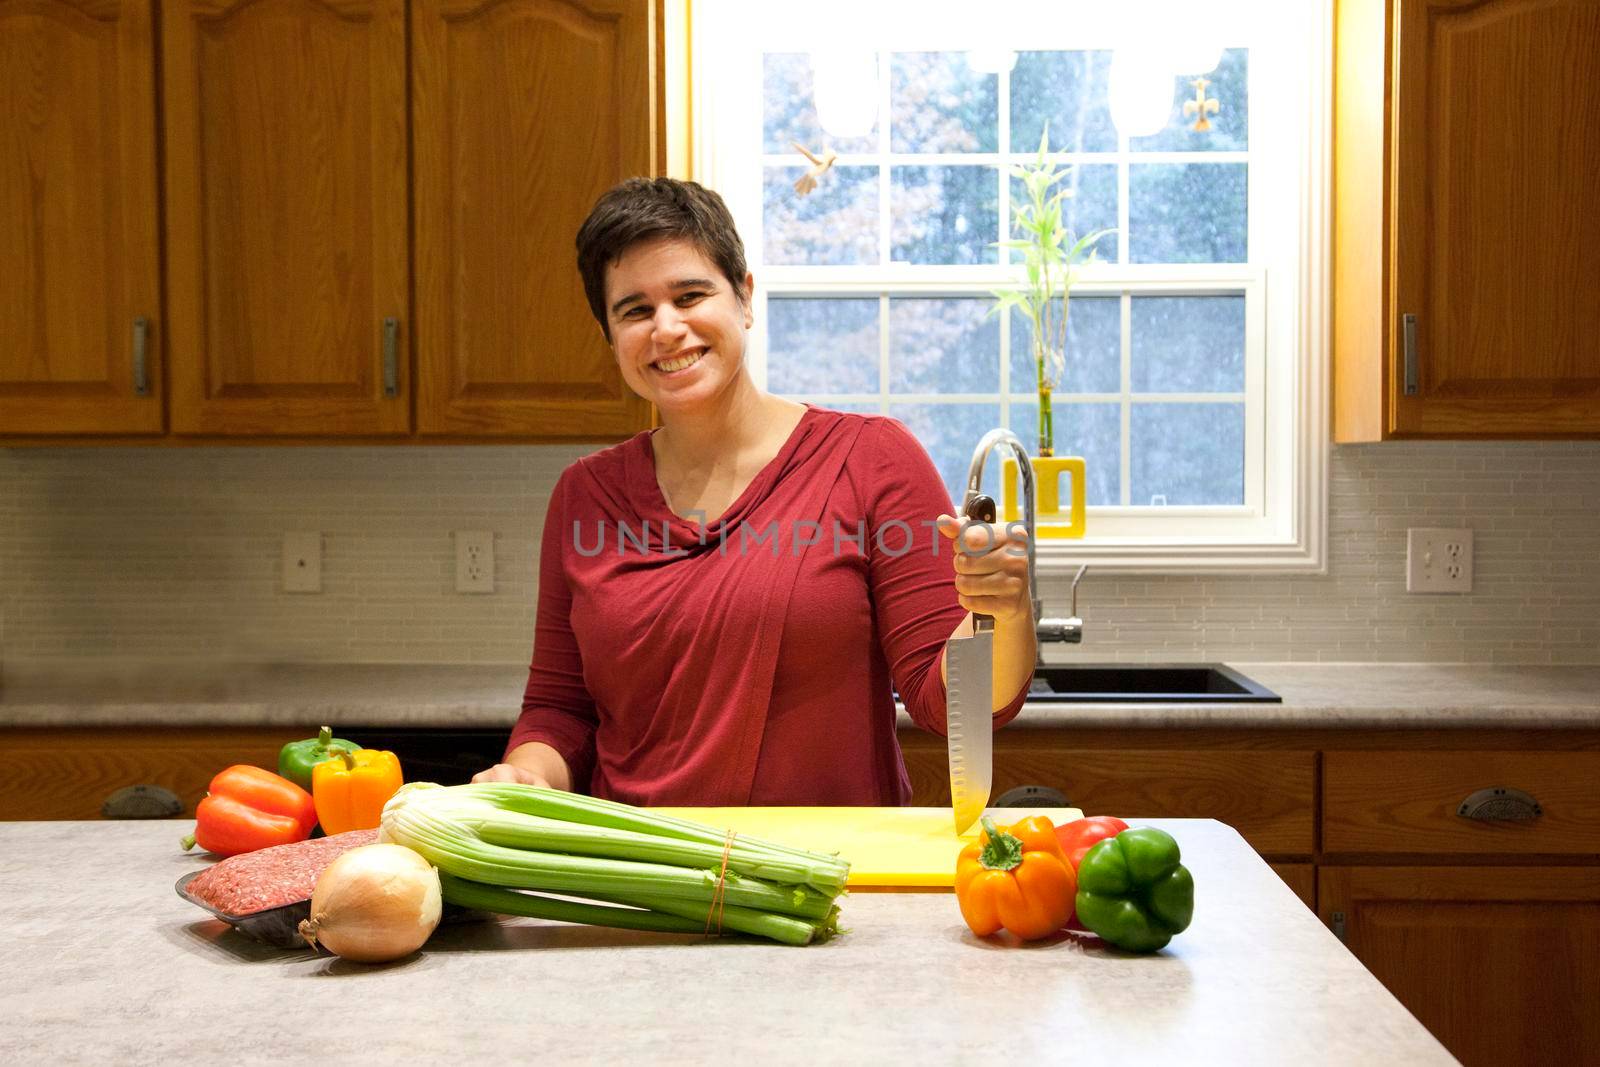 A smiling woman holds a cutting knife in her beautiful home kitchen ready to slice vegetables